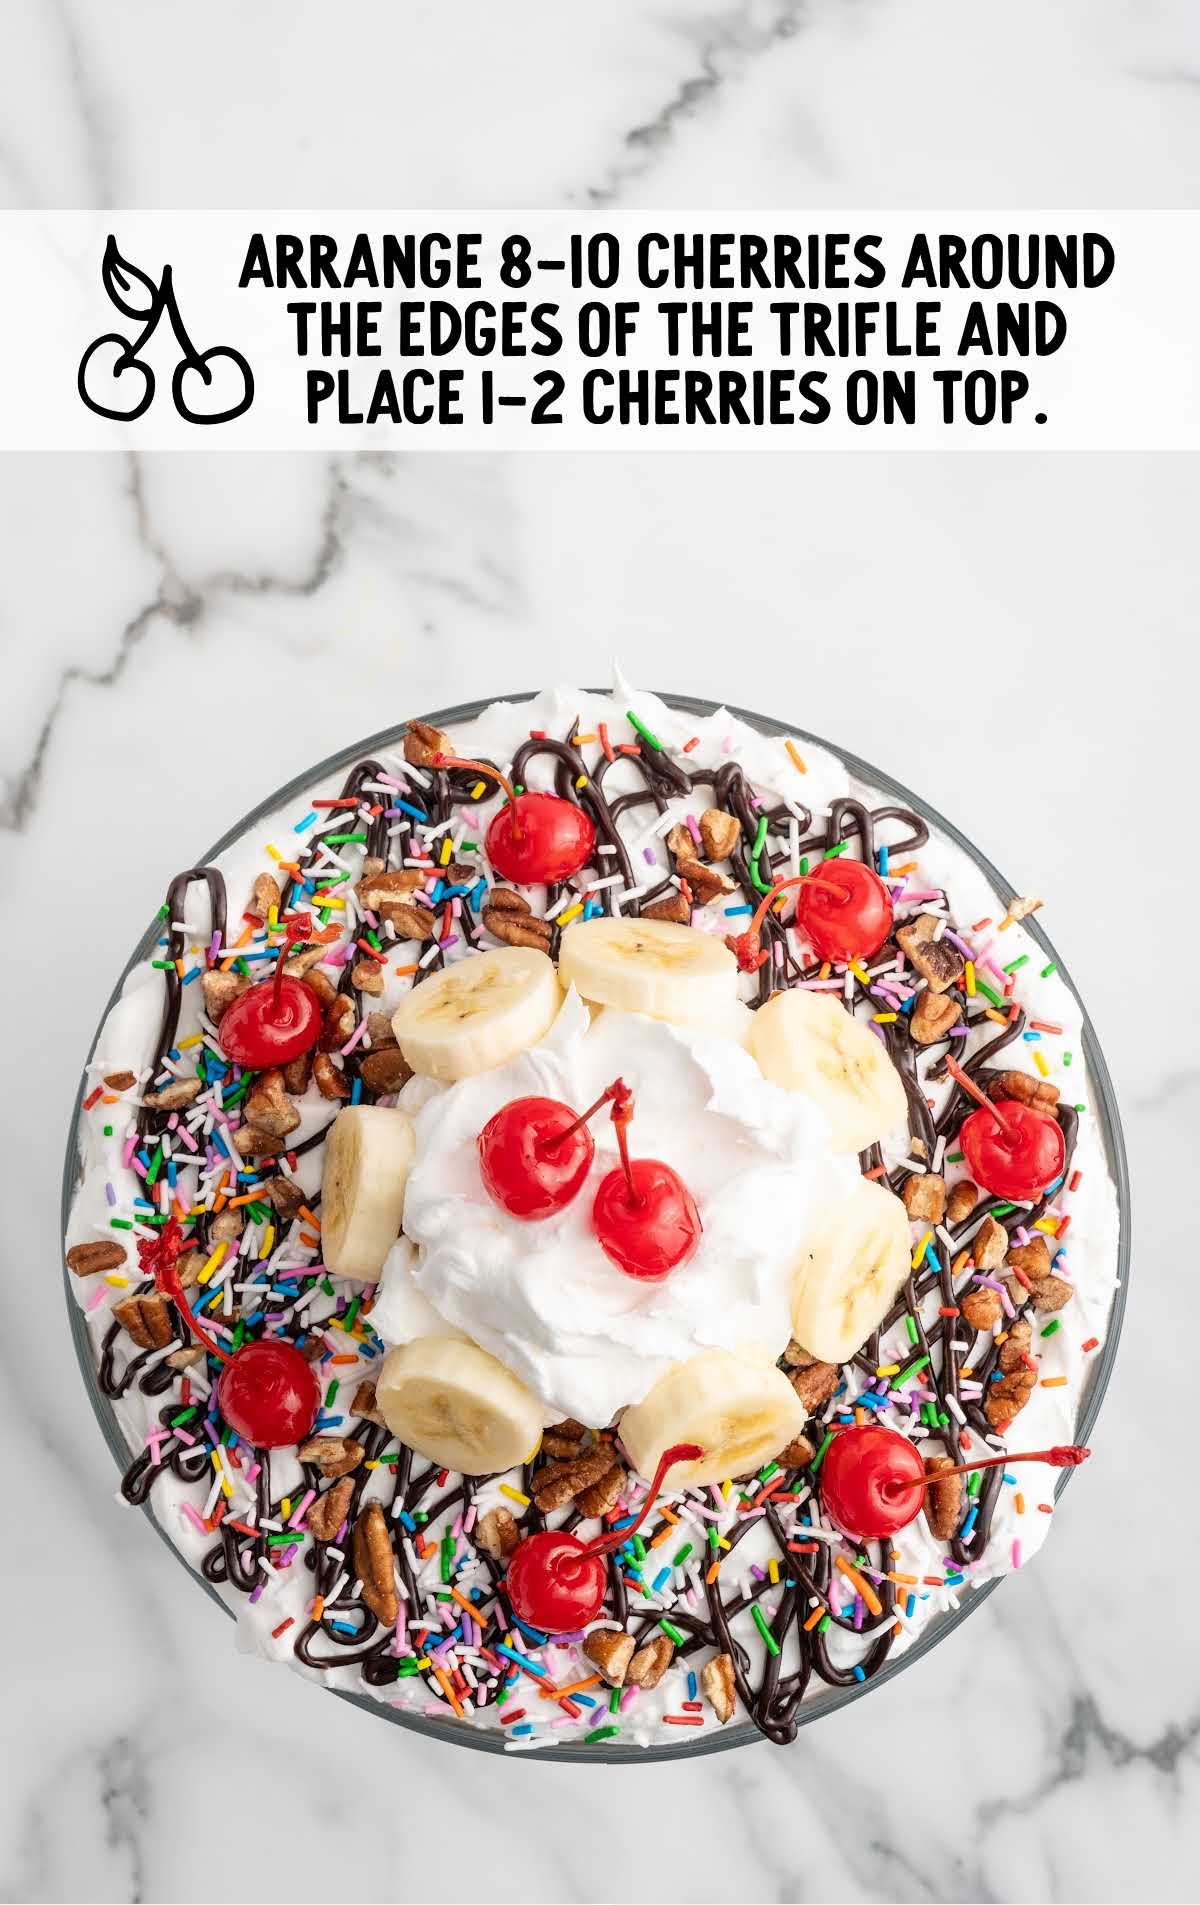 Ice Cream Trifle topped with sprinkles, banana slices, cherries, and whipped topping